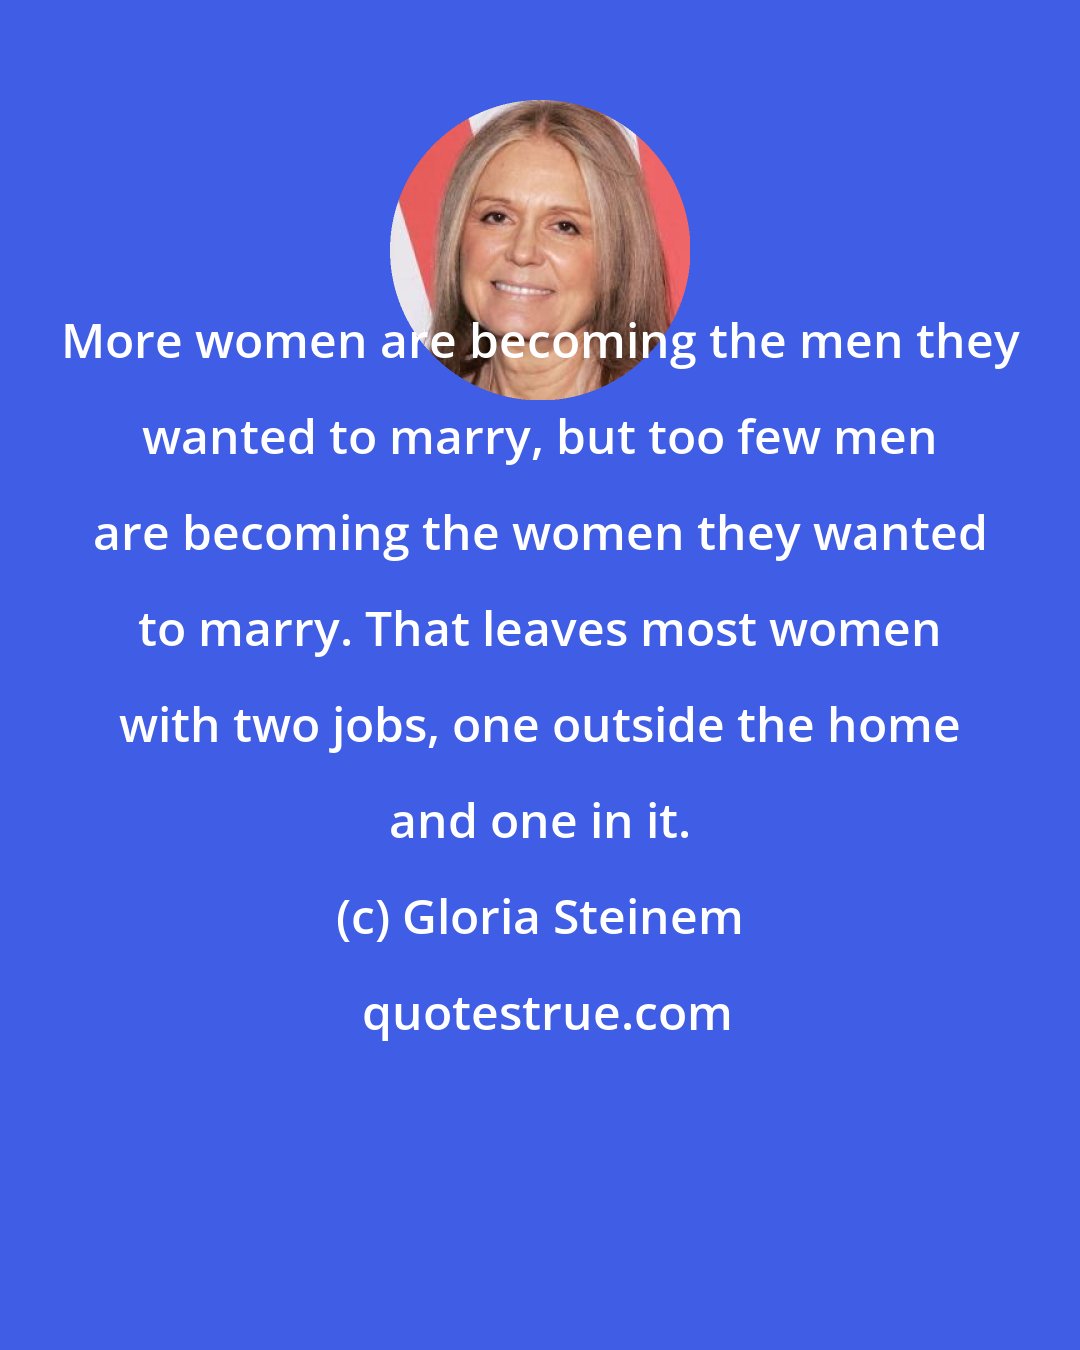 Gloria Steinem: More women are becoming the men they wanted to marry, but too few men are becoming the women they wanted to marry. That leaves most women with two jobs, one outside the home and one in it.